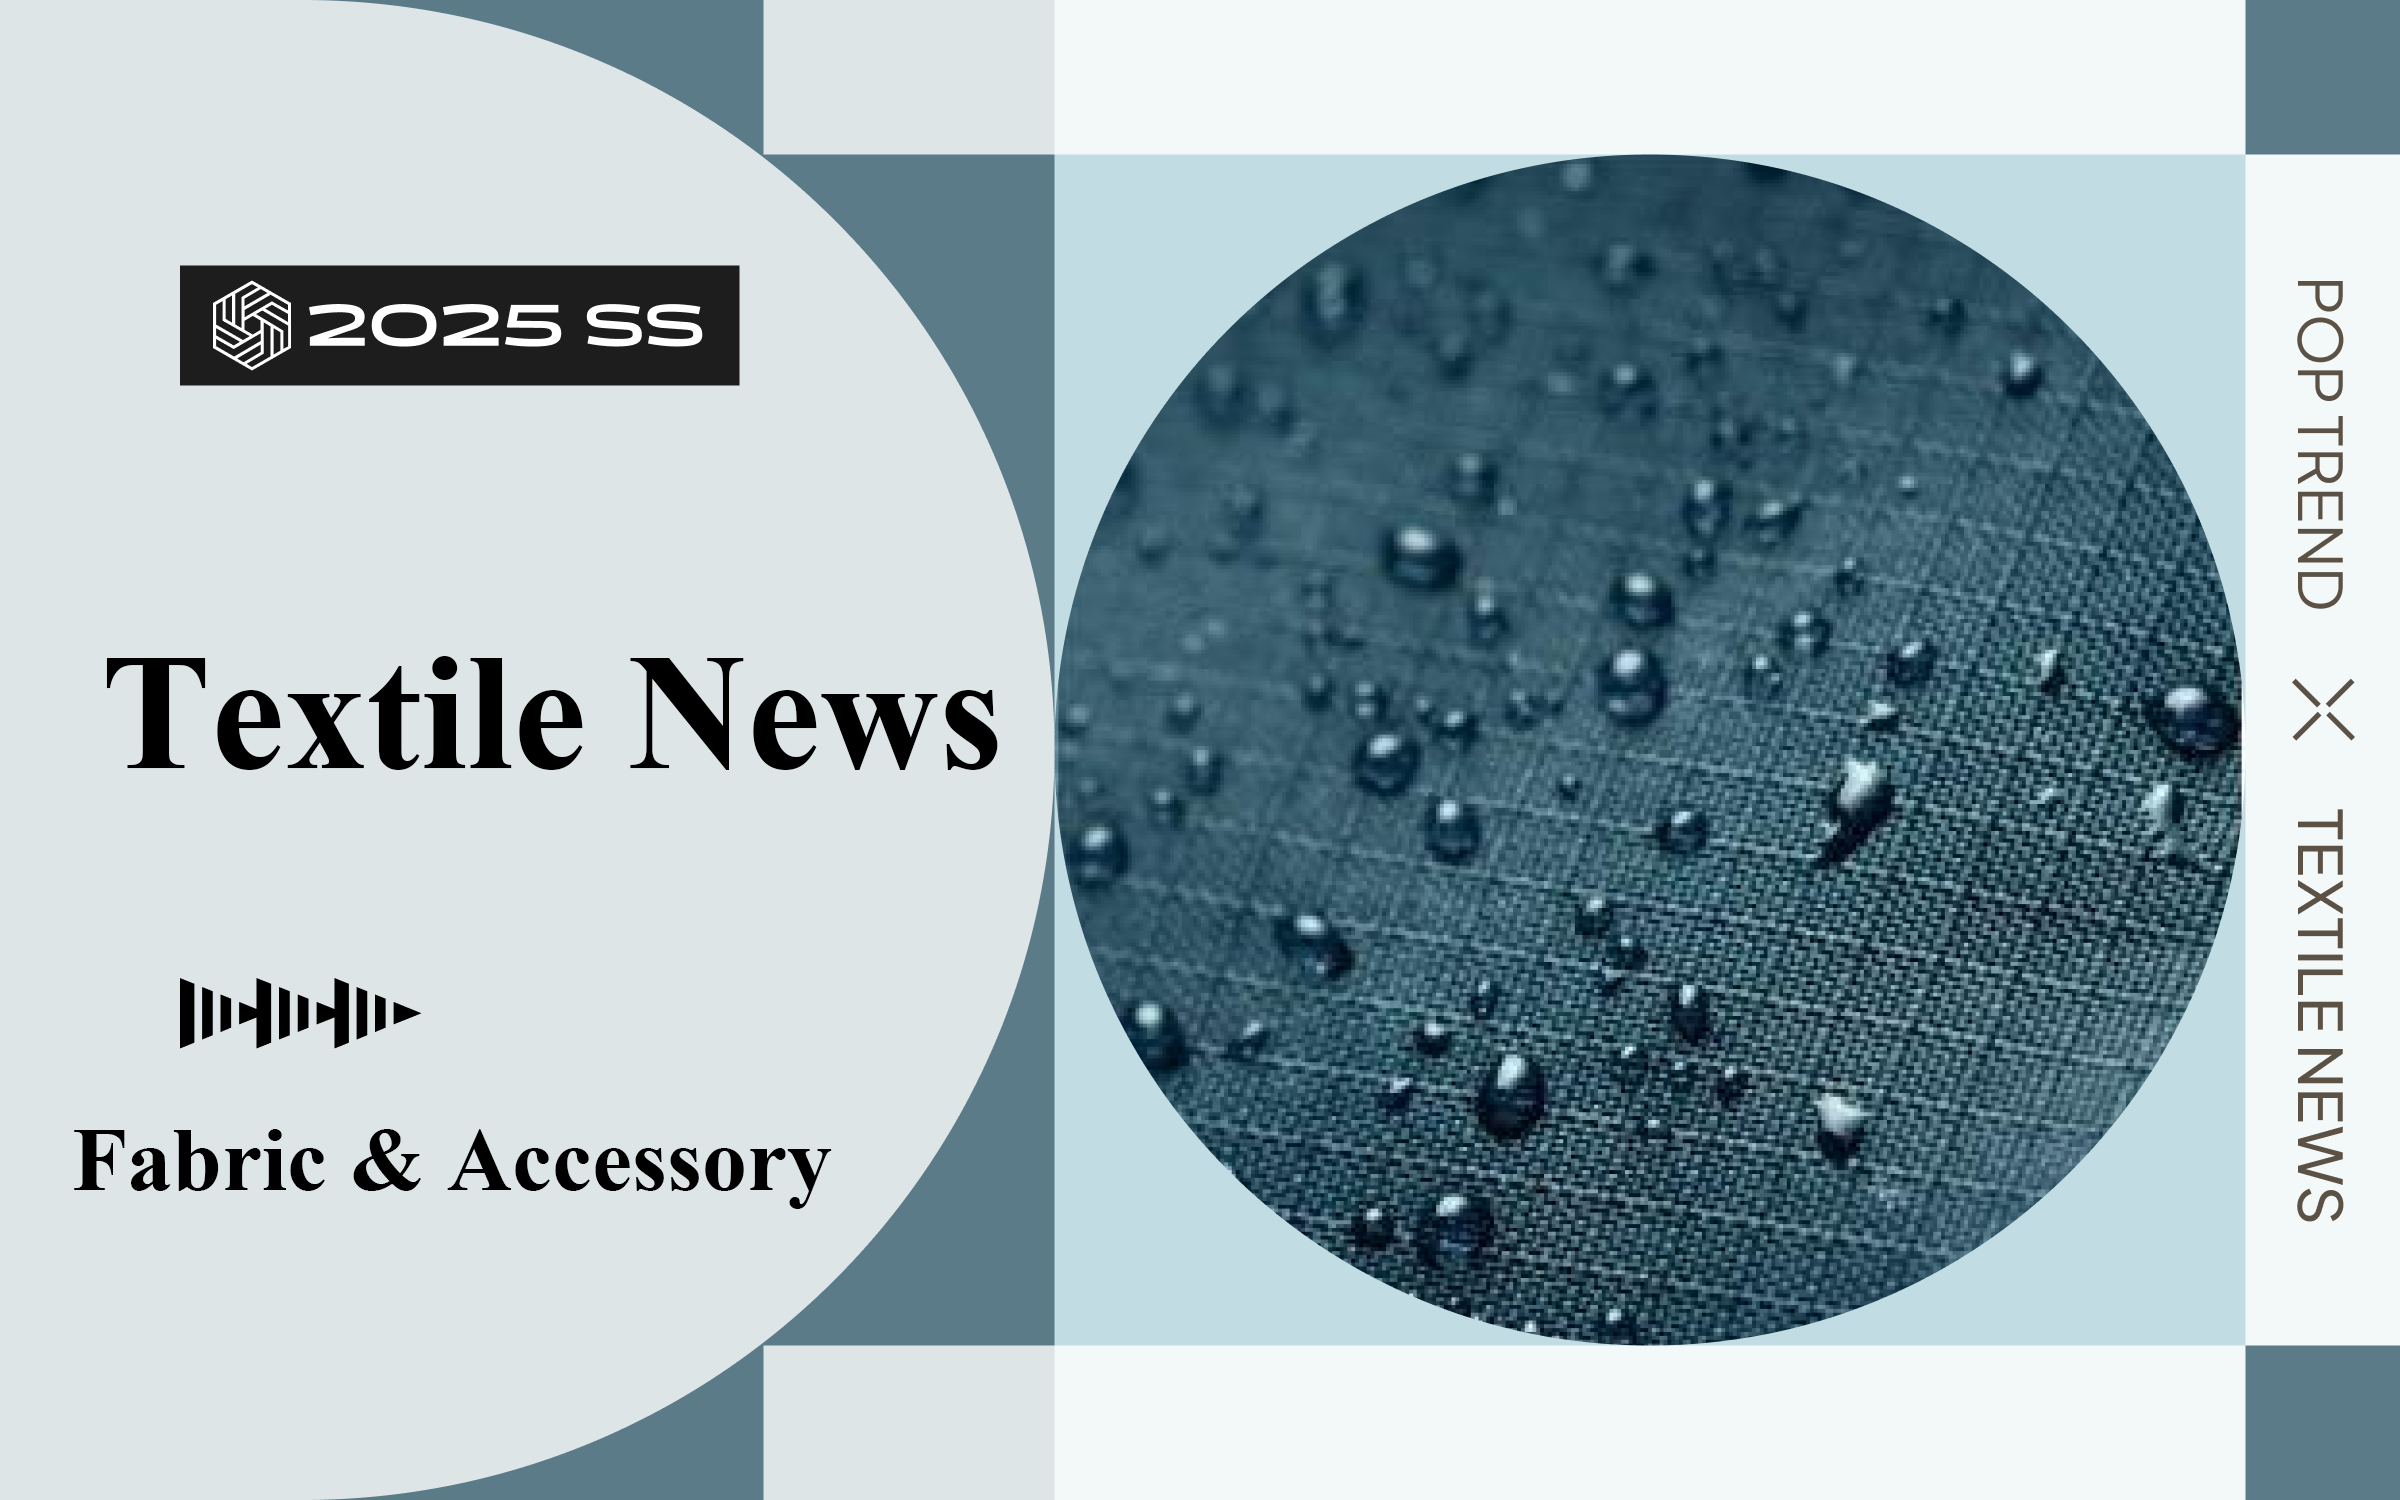 Textile News -- The Standards of Waterproof Fabric